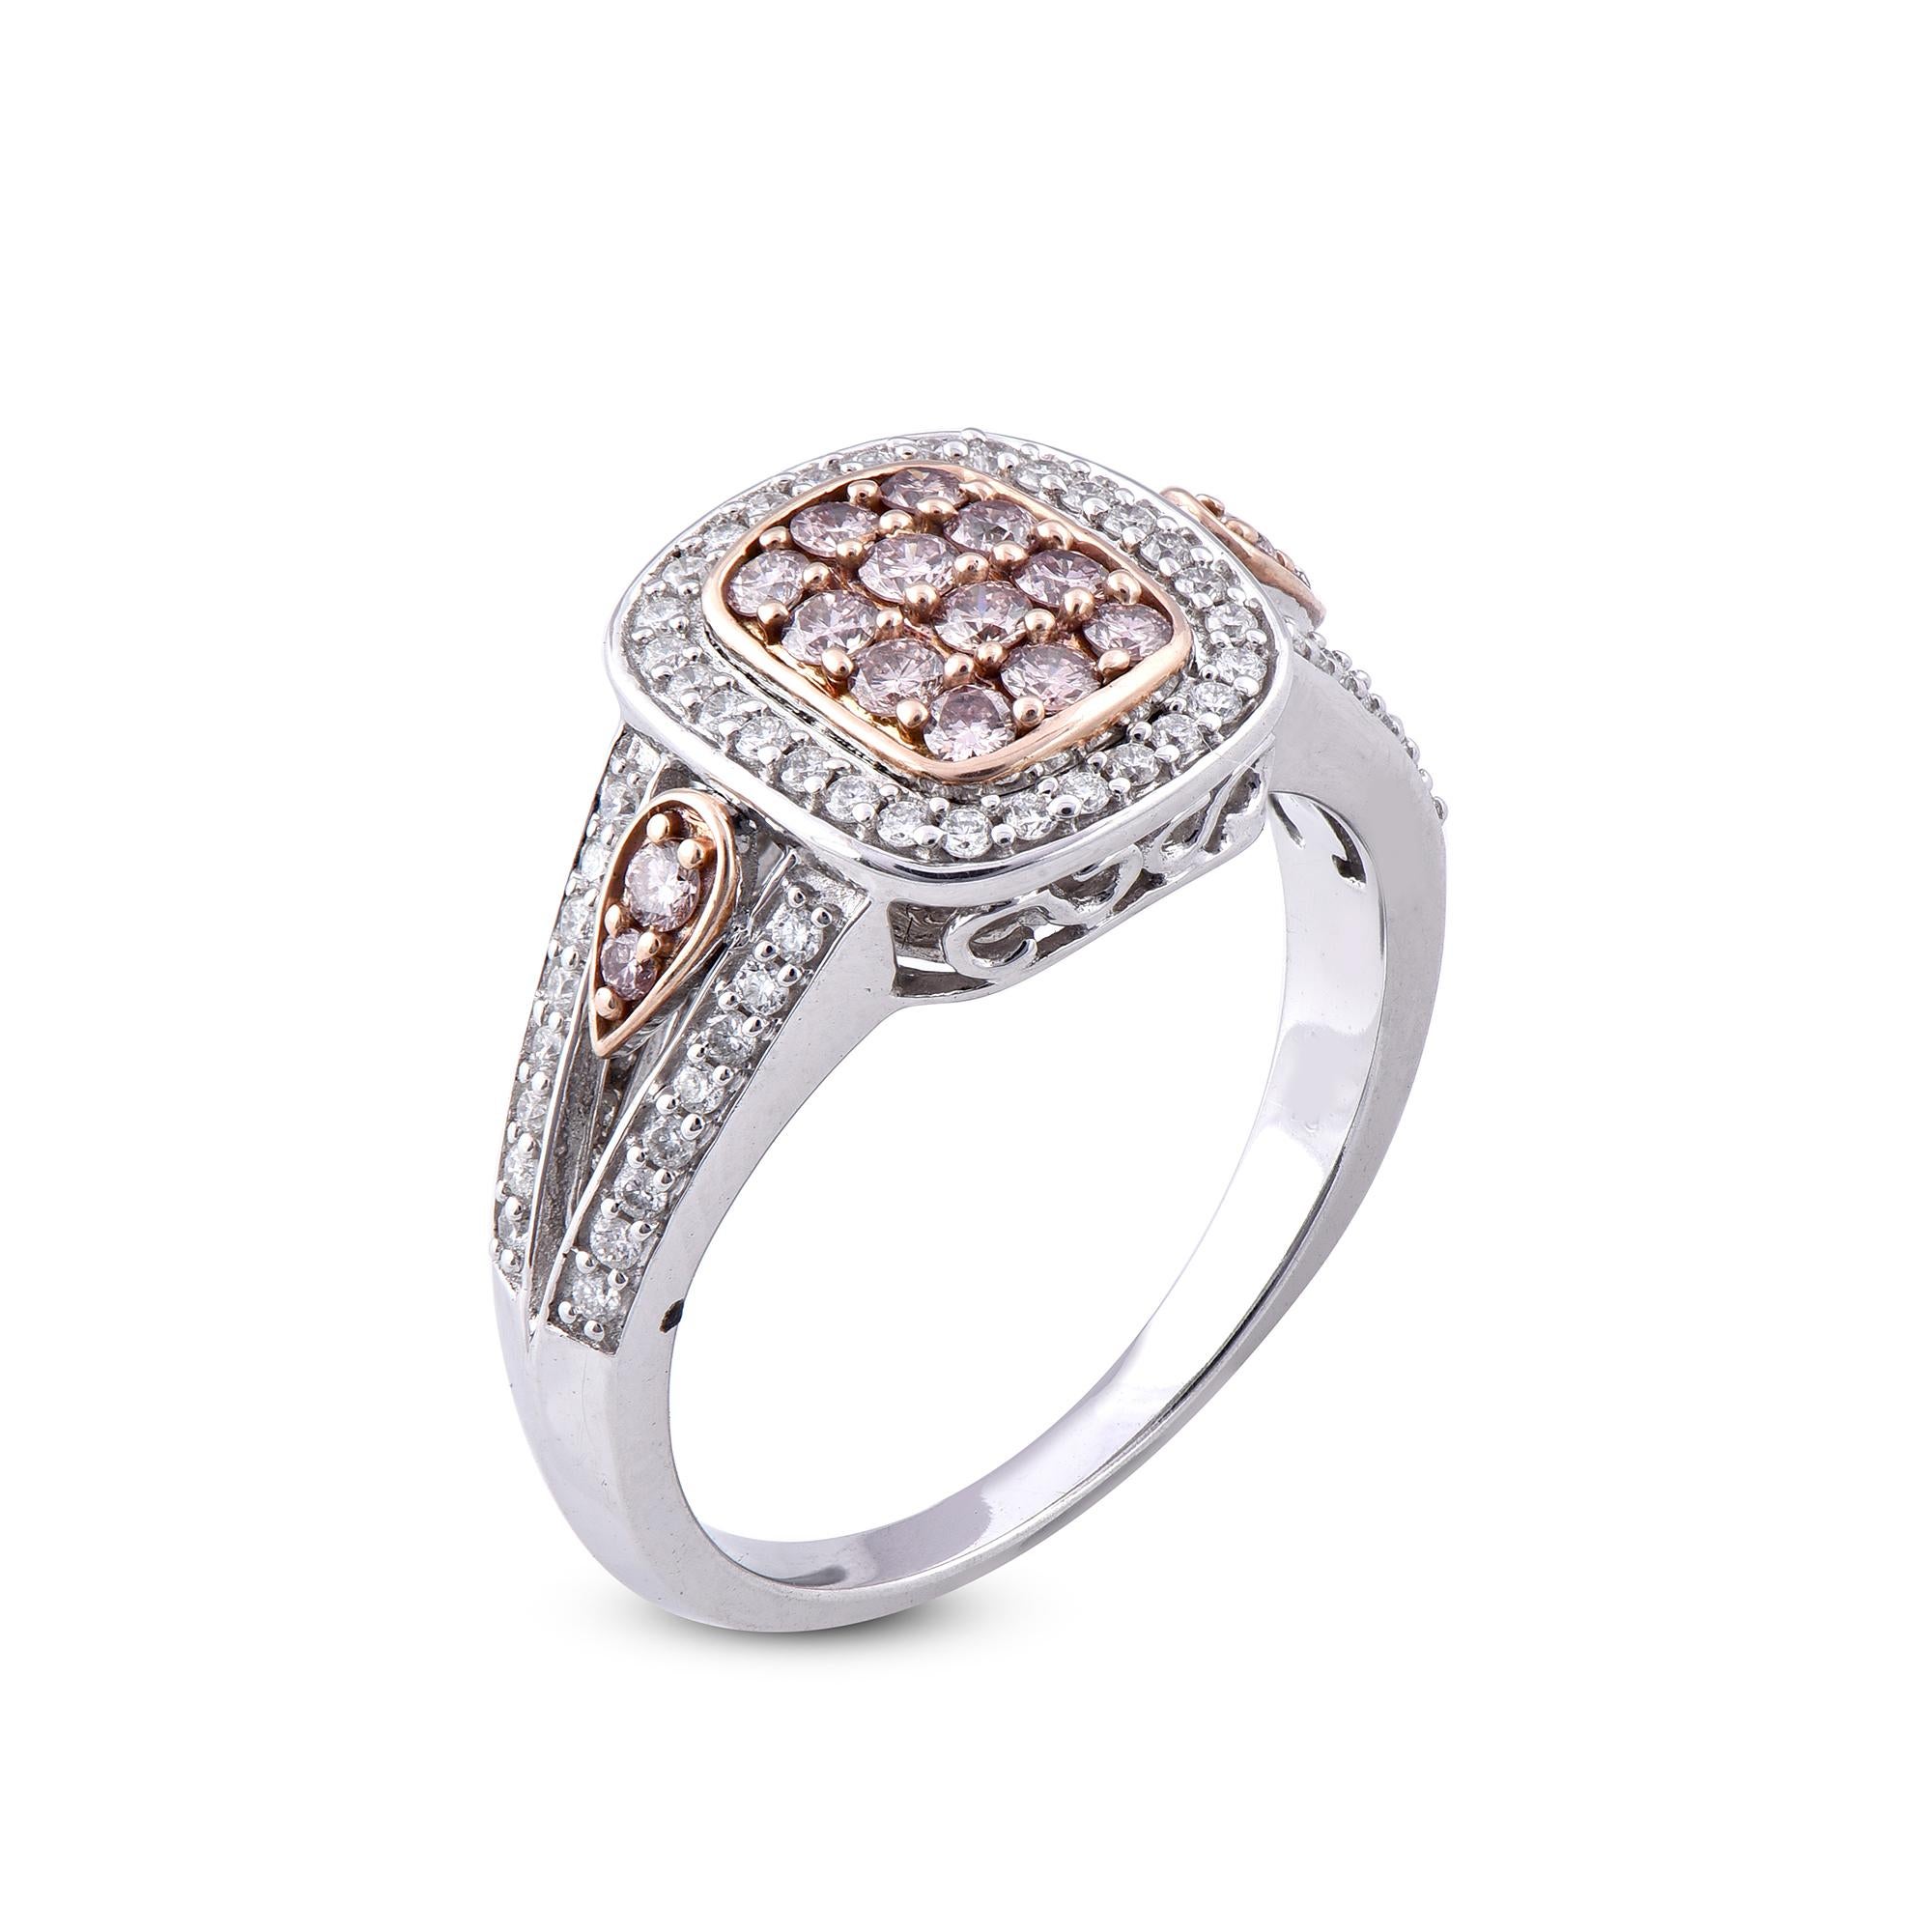 Exquisite 18K Two-Tone gold 0.50 carat diamonds cushion frame wedding ring. Expertly Crafted of sparkling 18 karat white and rose gold in high polish finish and set with 60 sparkling round white and 16 pink diamonds, this gorgeous wedding band